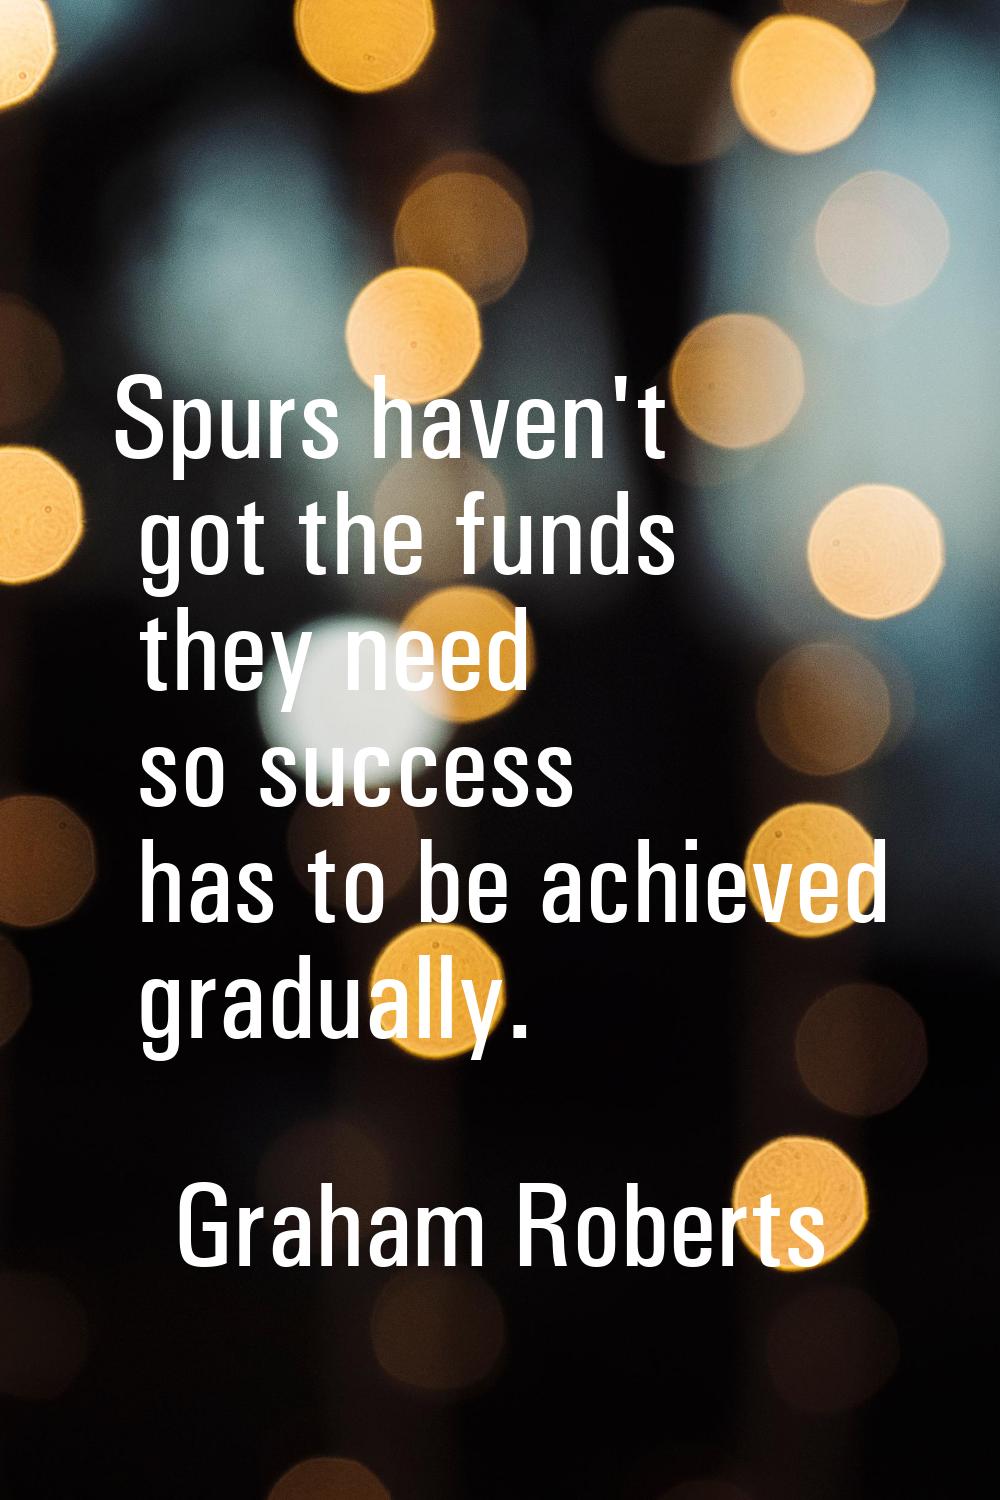 Spurs haven't got the funds they need so success has to be achieved gradually.